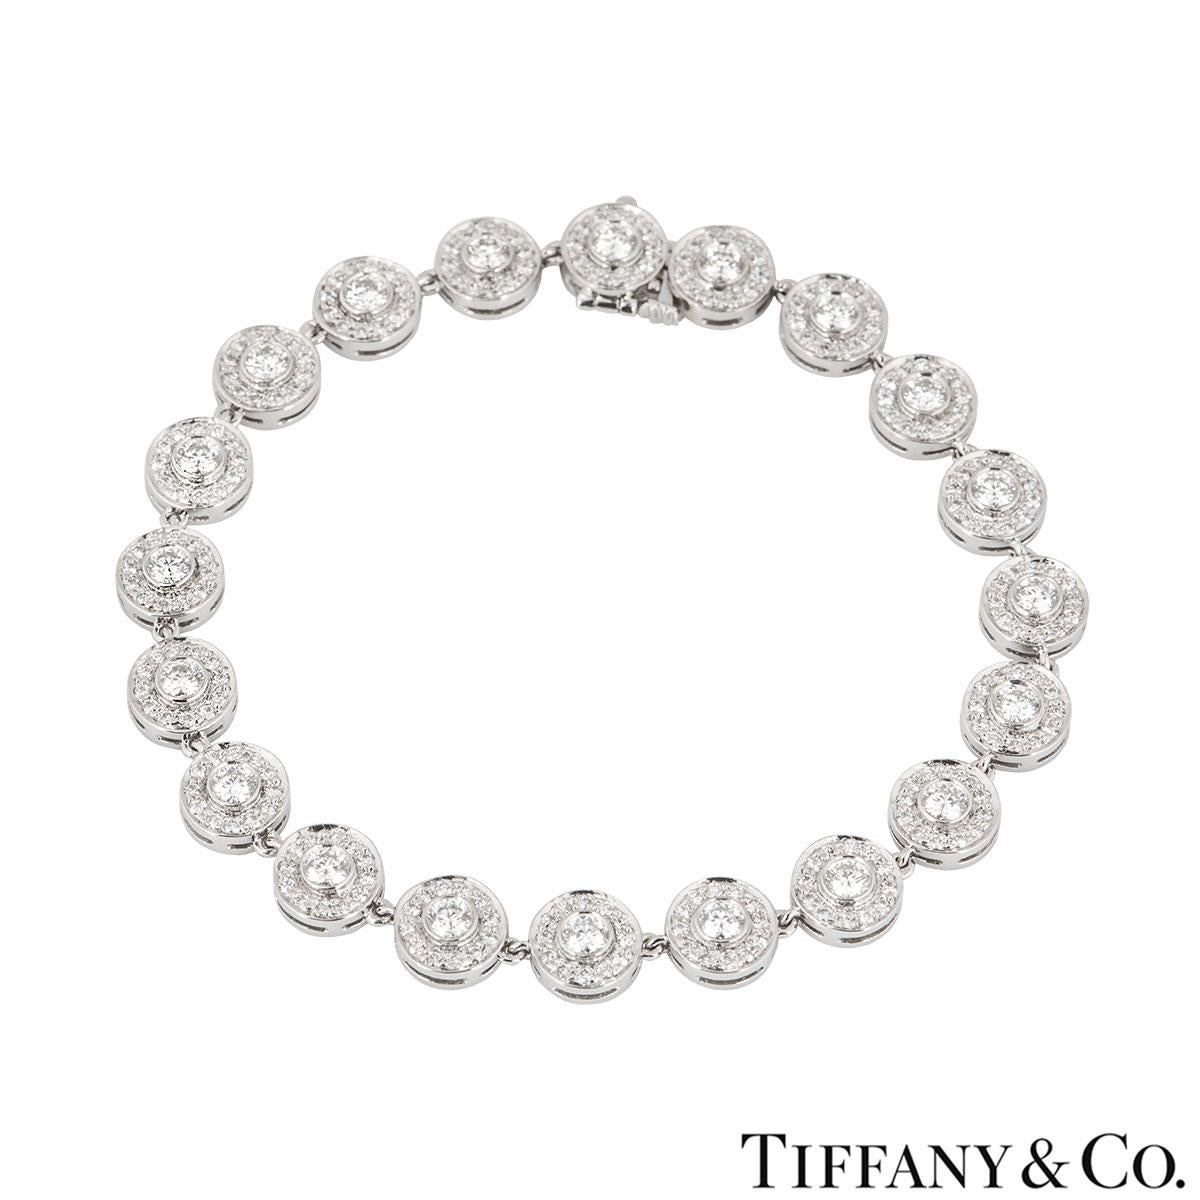 A platinum diamond bracelet by Tiffany & Co. from the Circlet collection. The bracelet features 20 circular motifs set with a single round brilliant cut diamond in the centre and surrounded by pave round brilliant cut diamonds.  The 260 diamonds